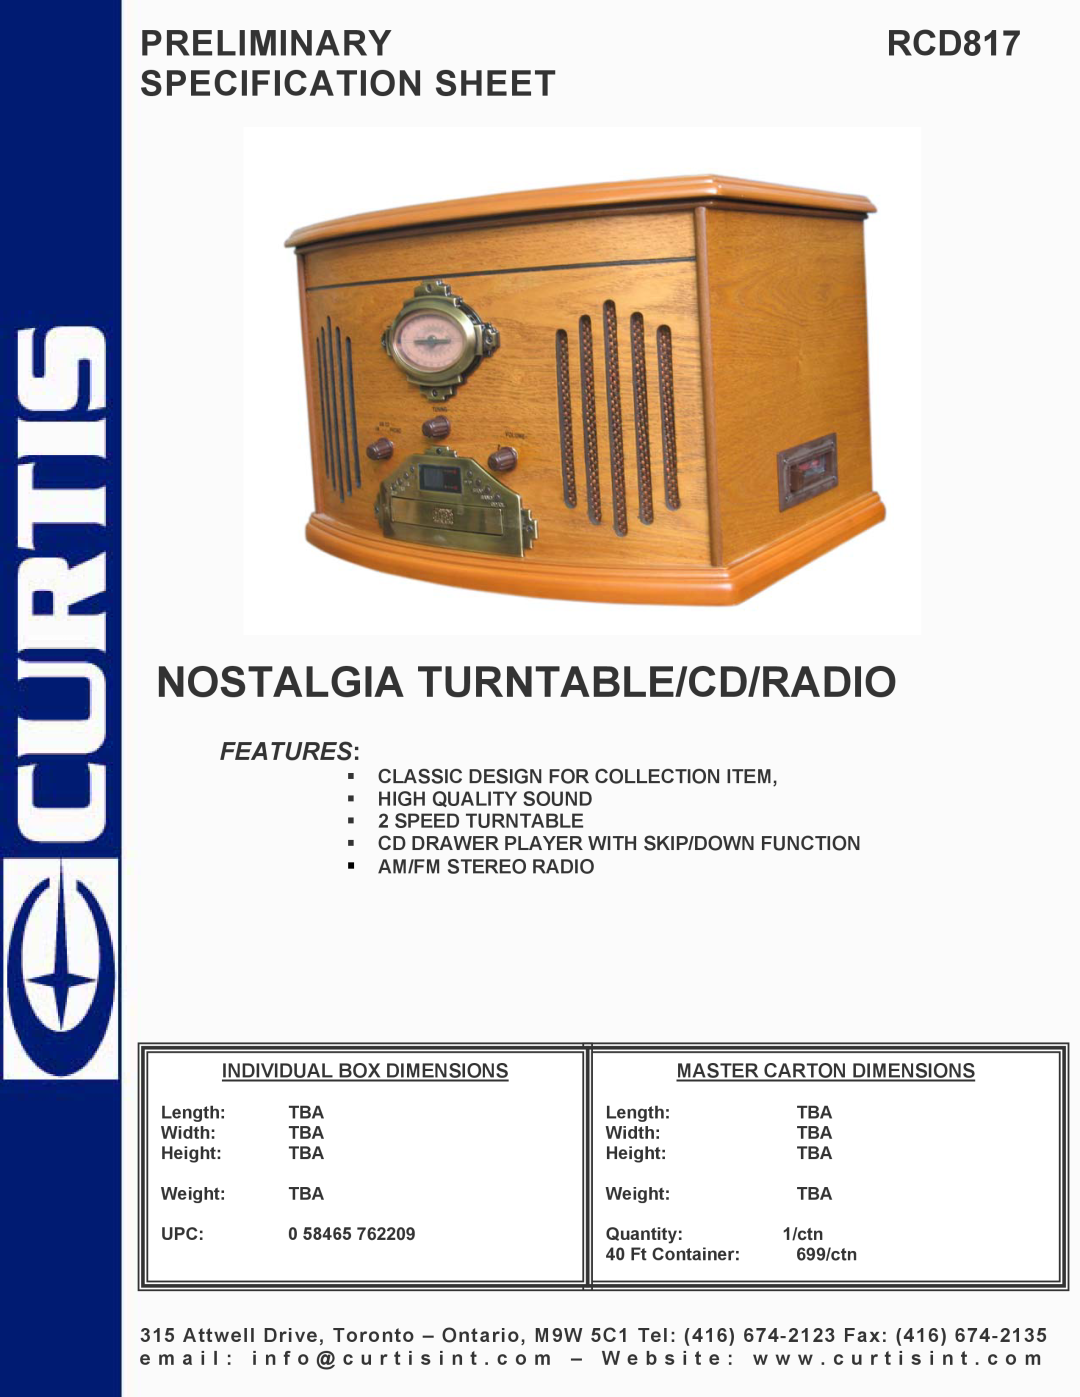 Curtis specifications Nostalgia Turntable/Cd/Radio, PRELIMINARYRCD817 SPECIFICATION SHEET, Features 